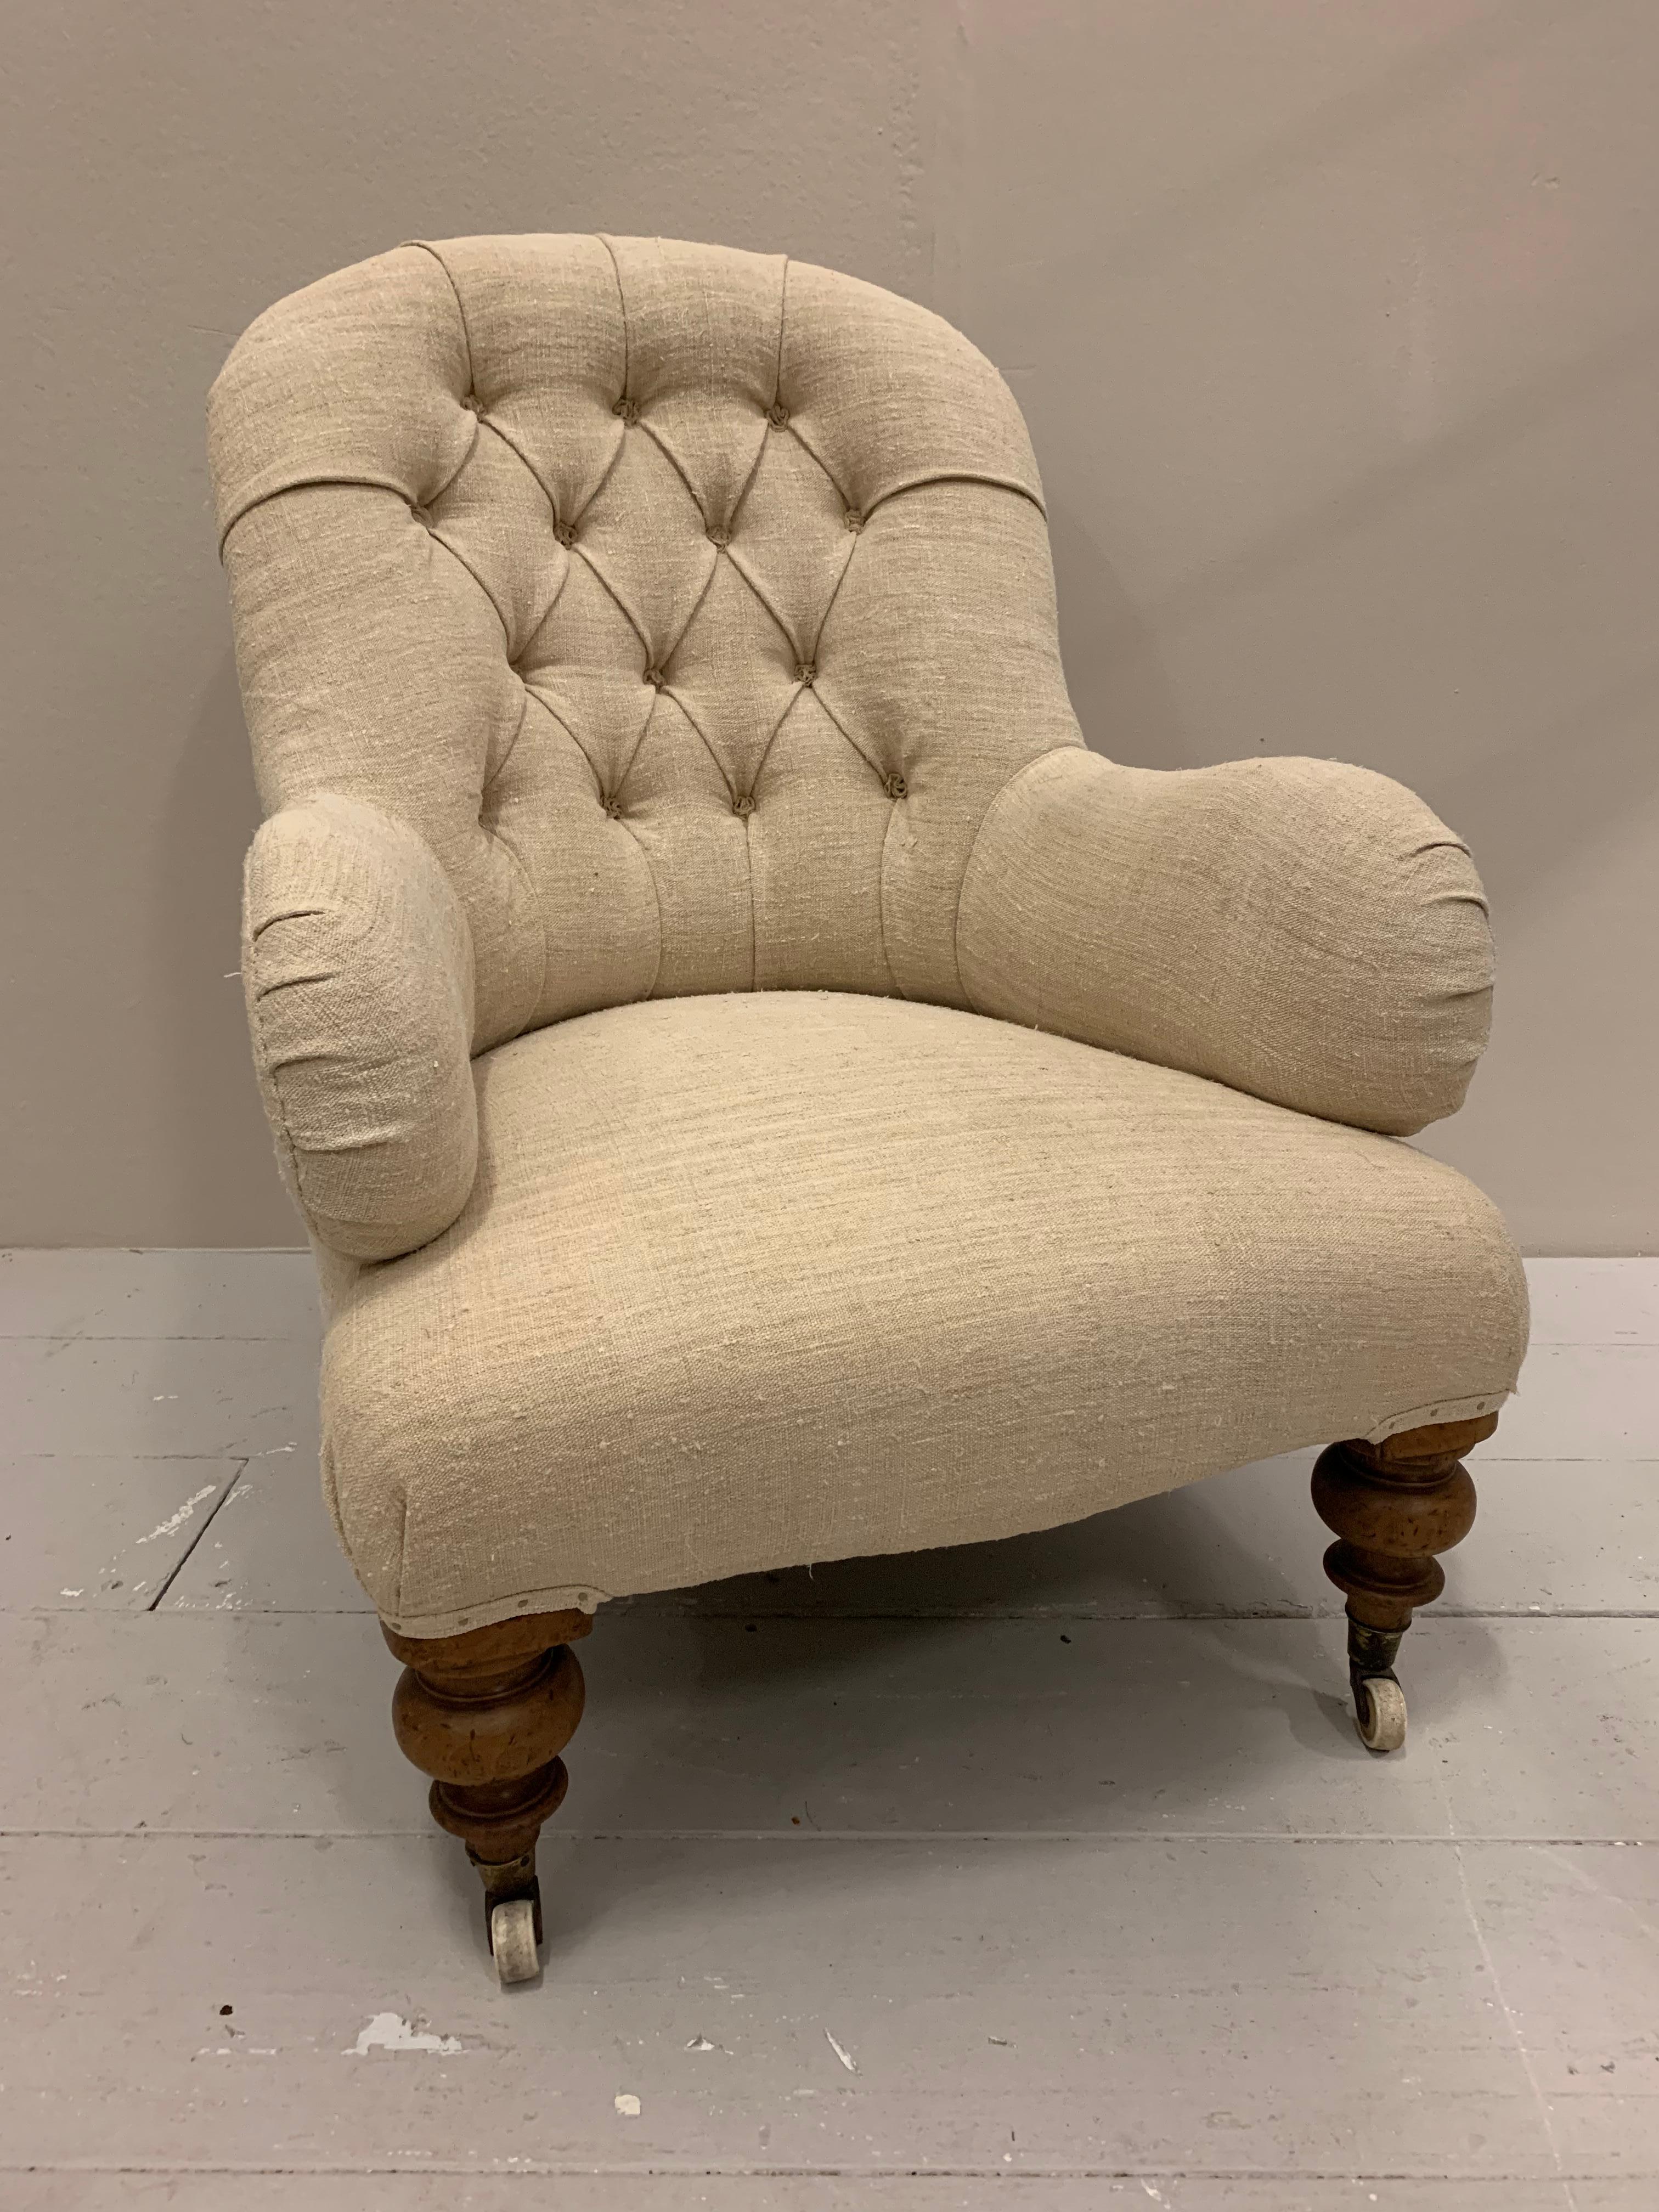 Circa 19th Century English Upholstered Buttoned Back Armchair in French Linen For Sale 1